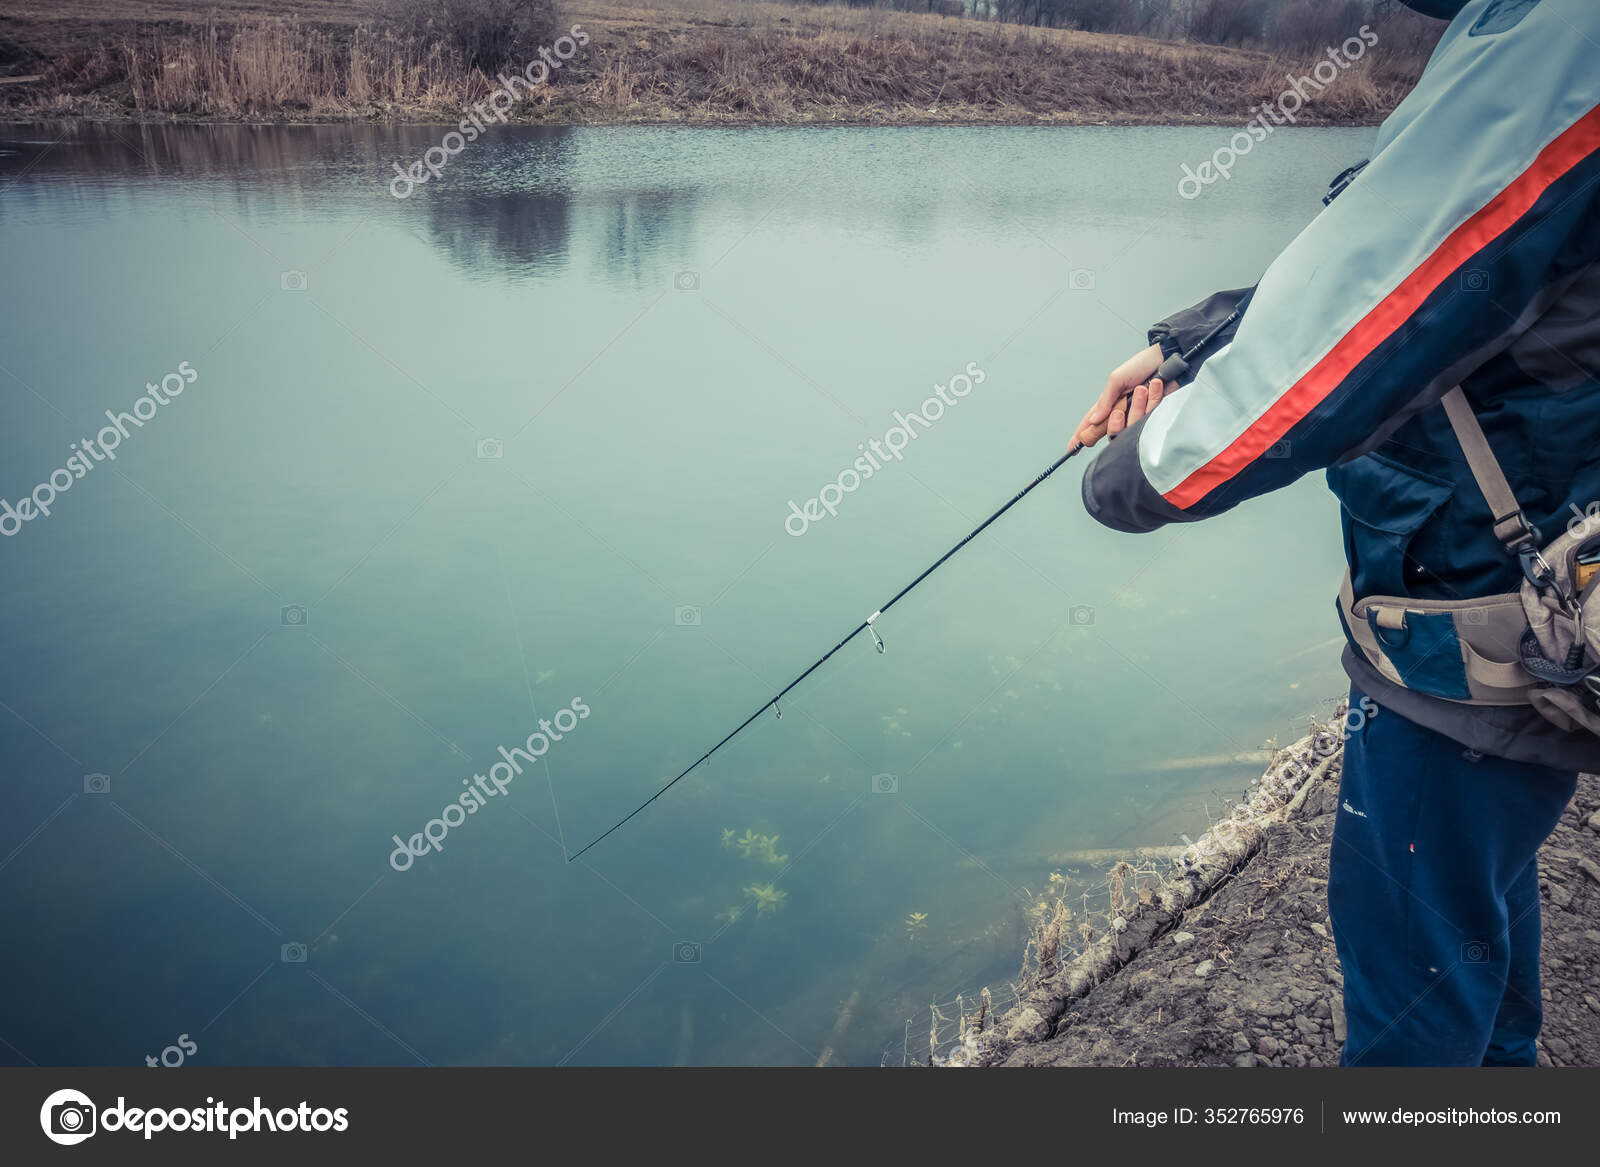 Background Fishing Theme Stock Photo by ©aallm 352765976